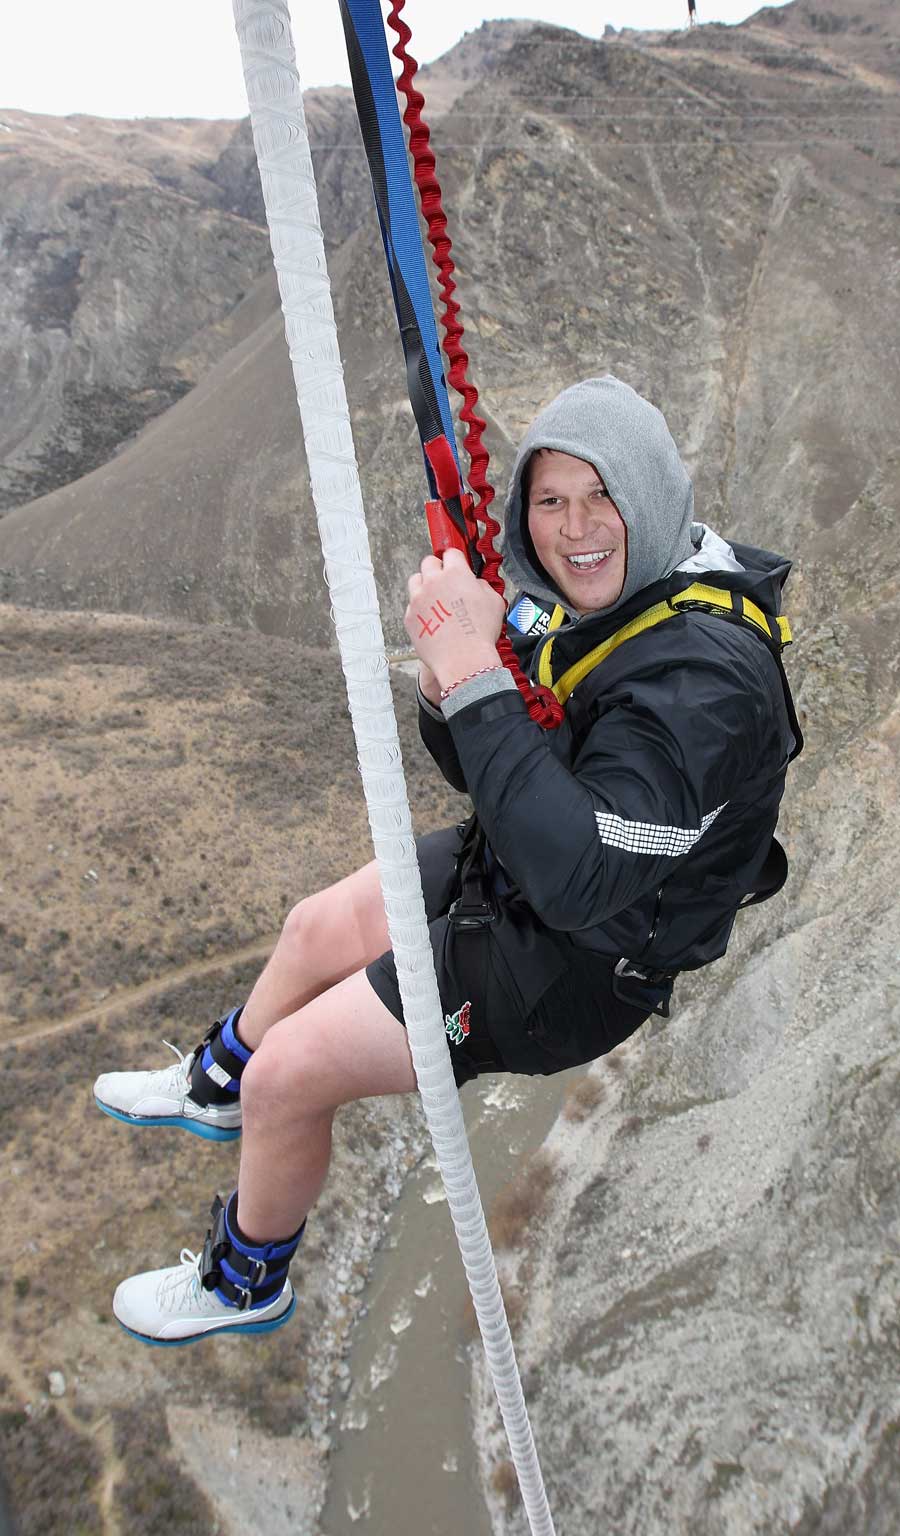 England's Dylan Hartley is a relieved man after completing the bungy jump